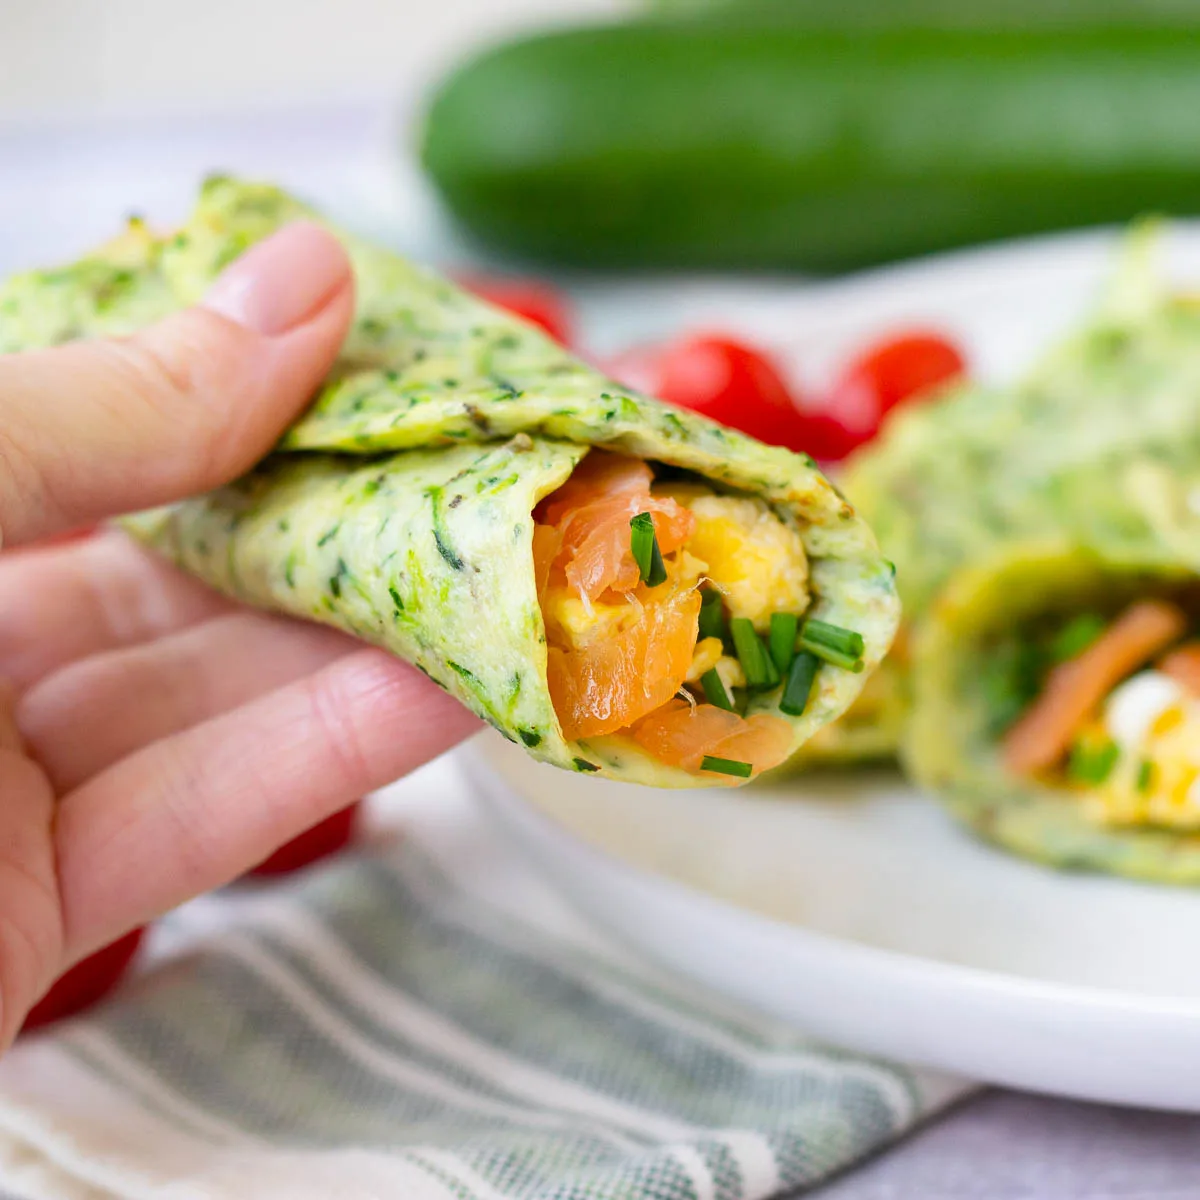 Hand holding zucchini breakfast wrap to show inside fillings